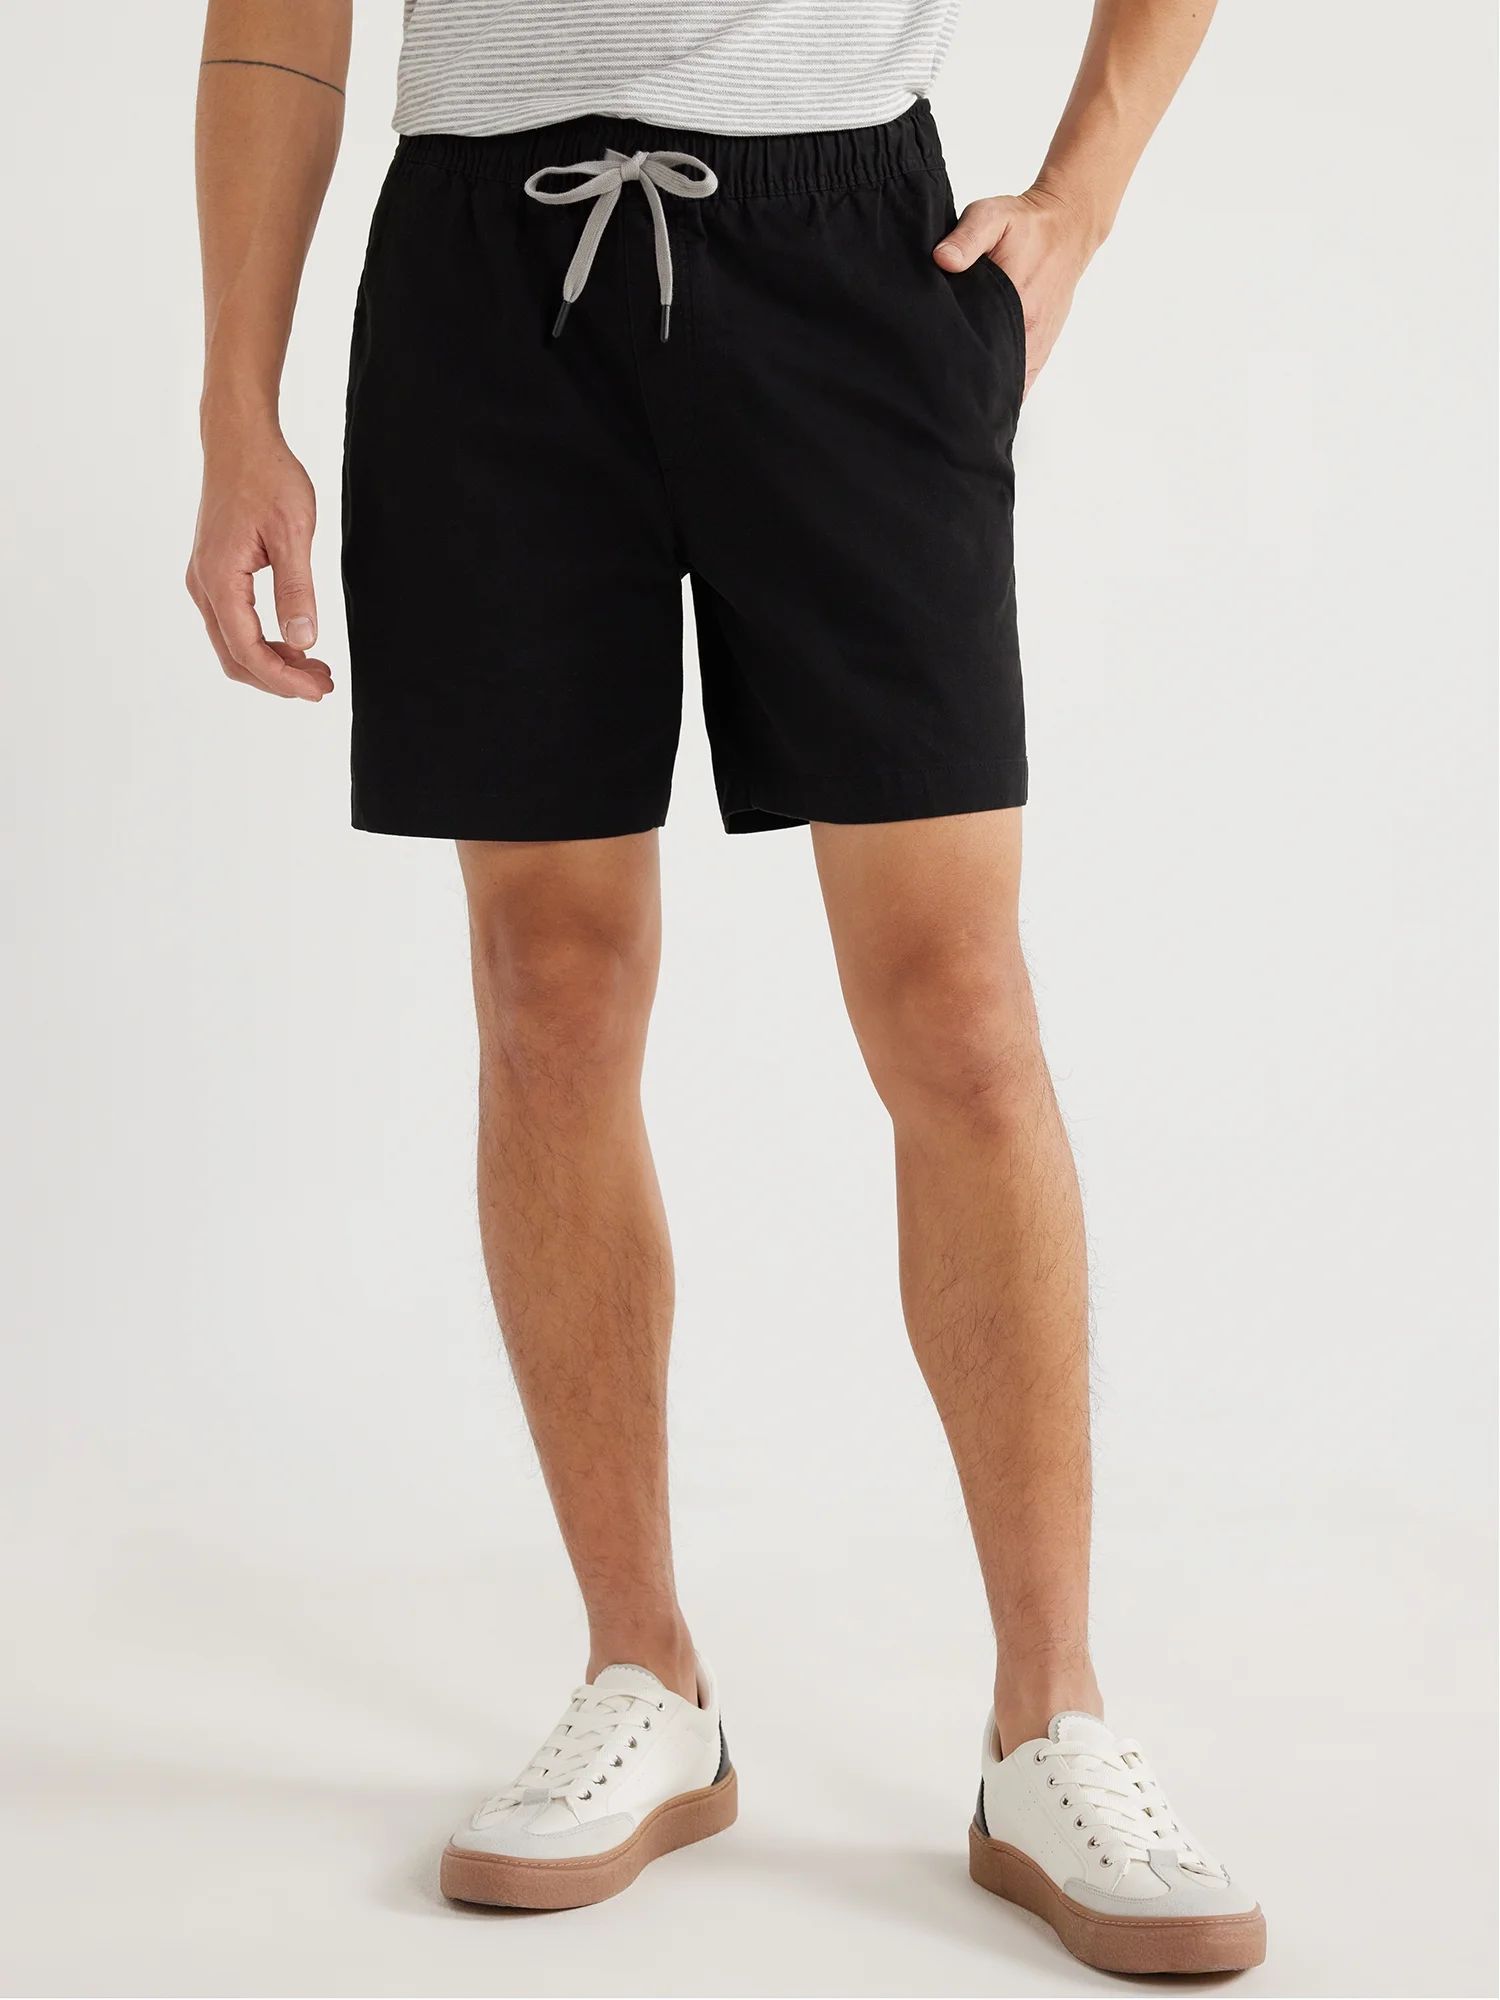 Free Assembly Men's Pull On Shorts with Drawstring, Sizes S-3XL | Walmart (US)